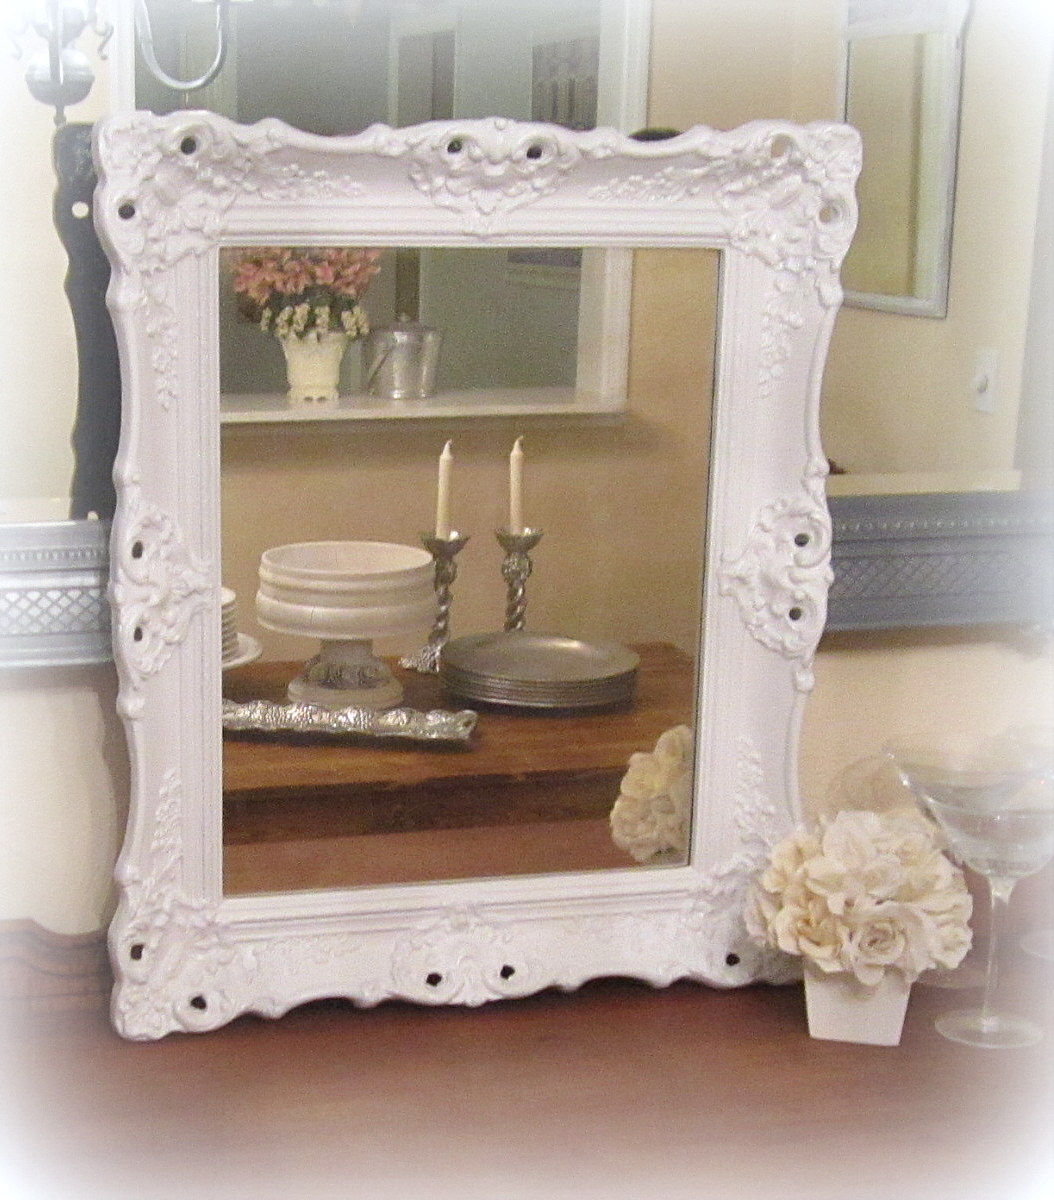 Vintage Mirrors For Sale 102